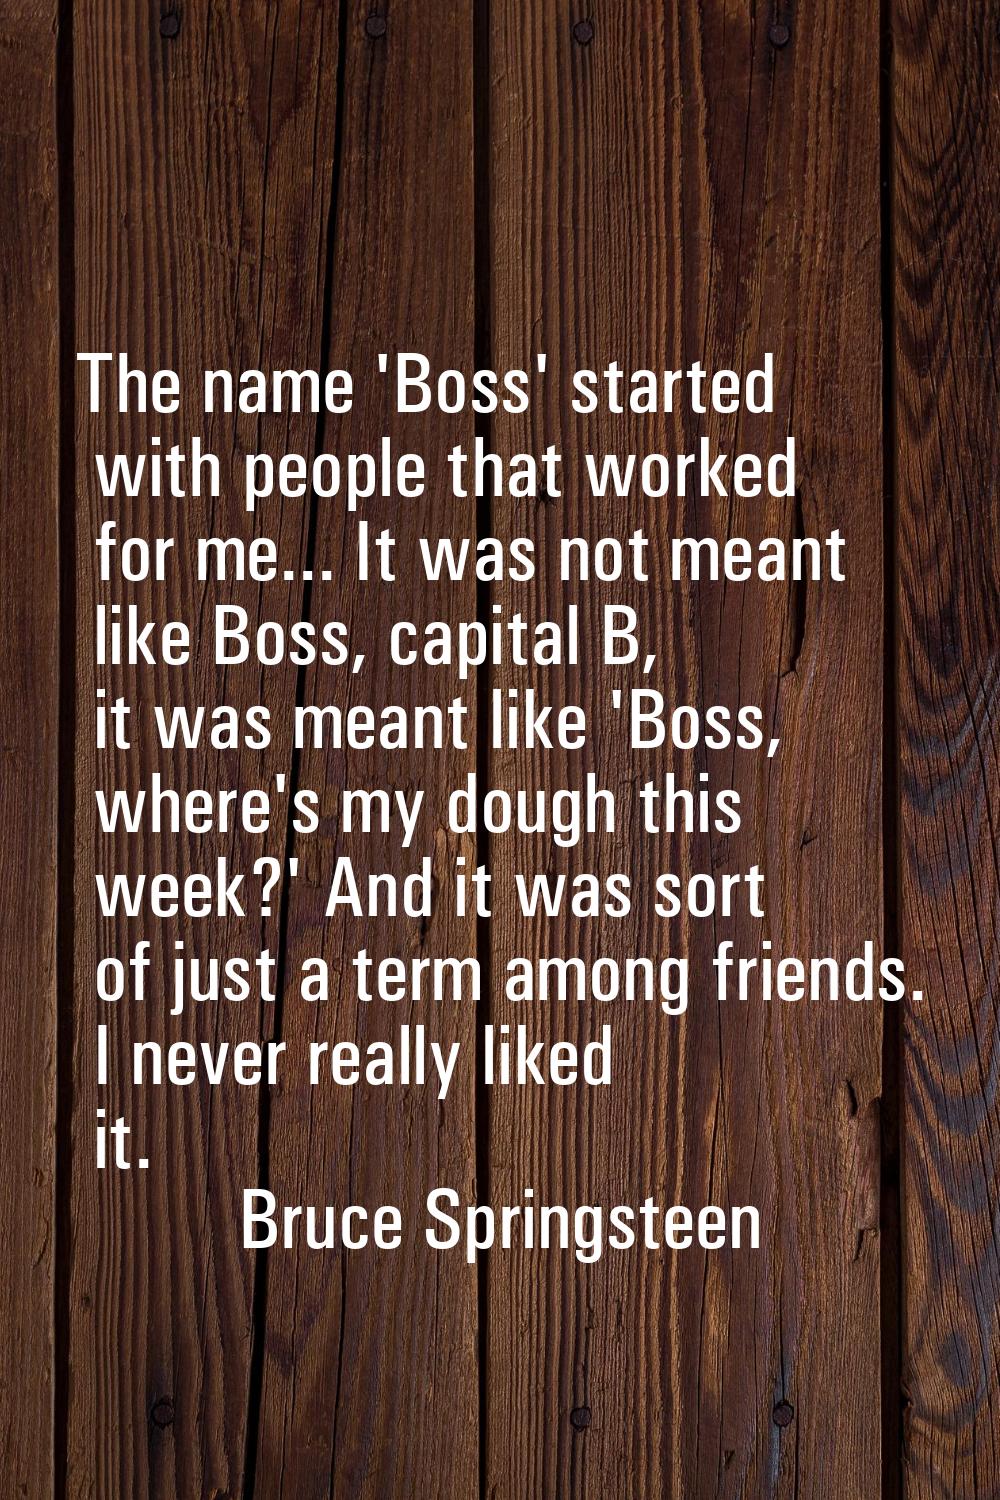 The name 'Boss' started with people that worked for me... It was not meant like Boss, capital B, it